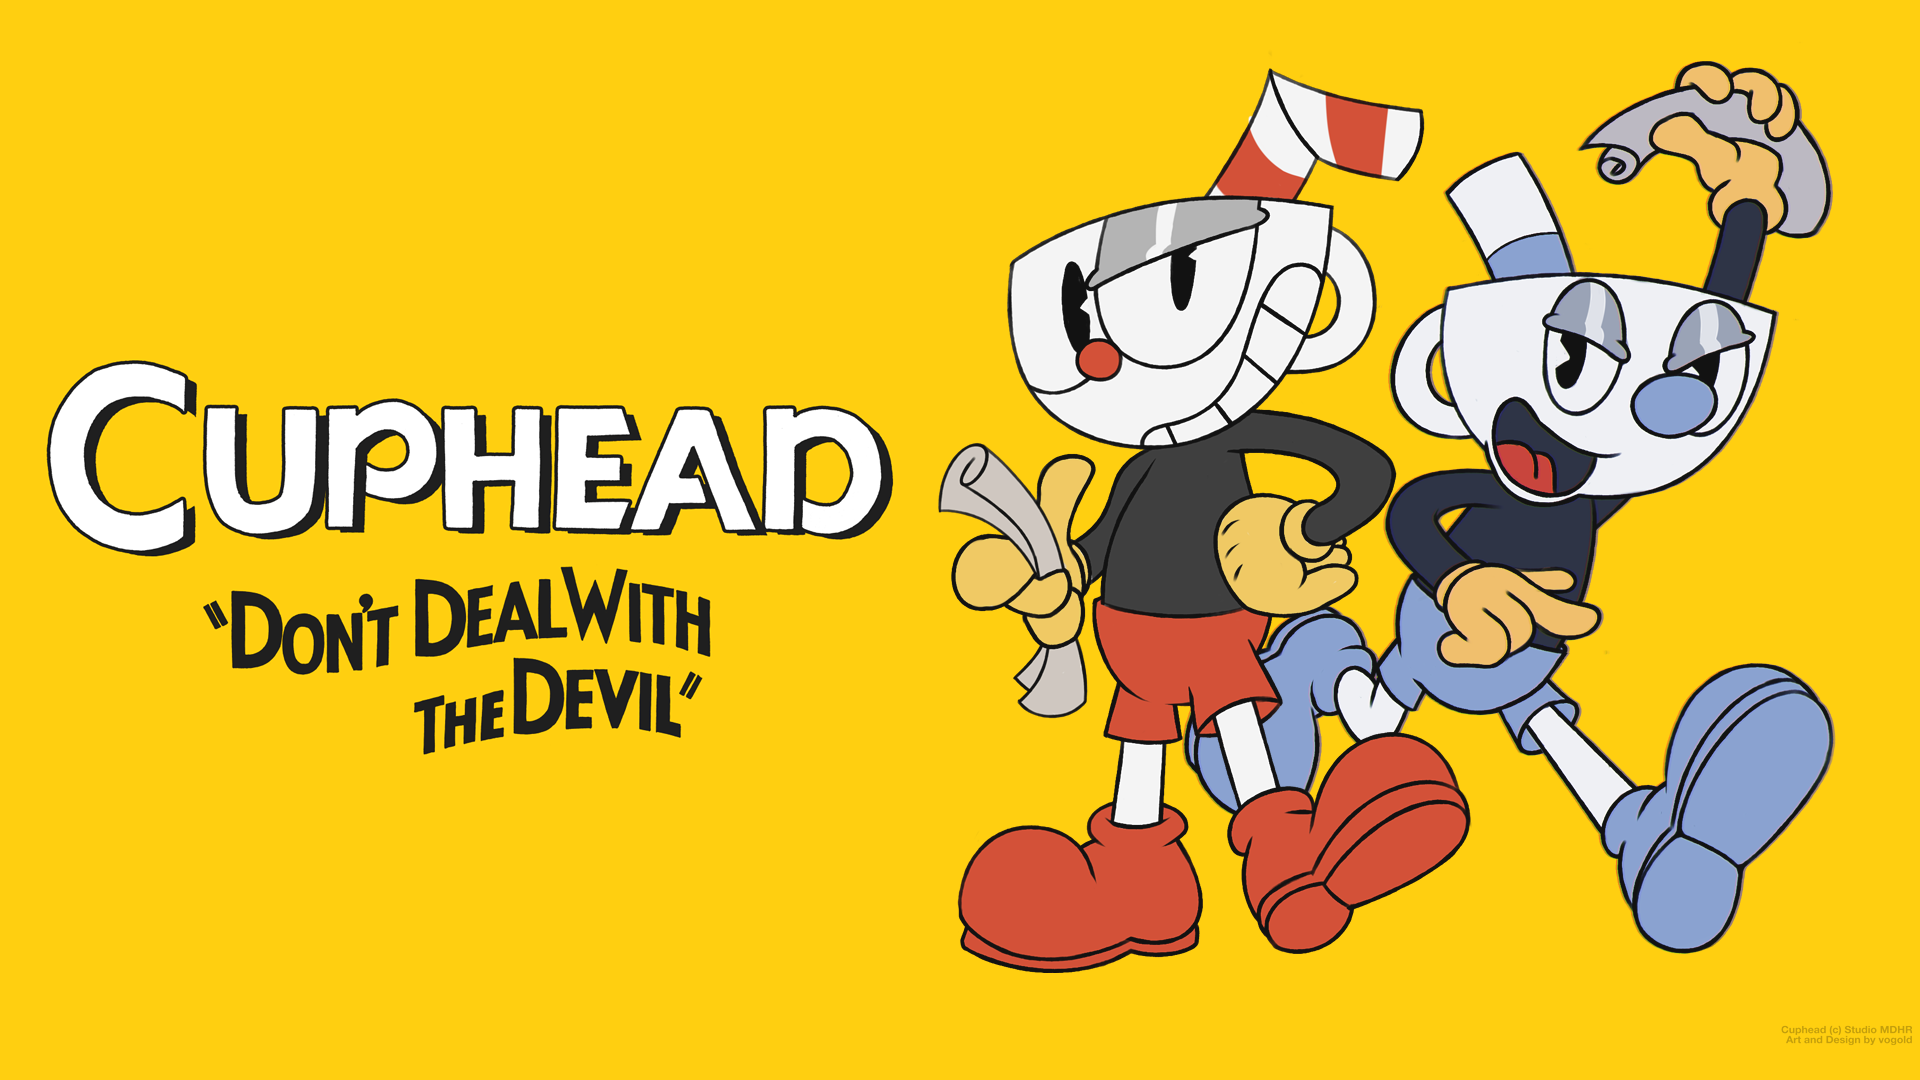 Cuphead The Devil Wallpaper - Cat with Monocle